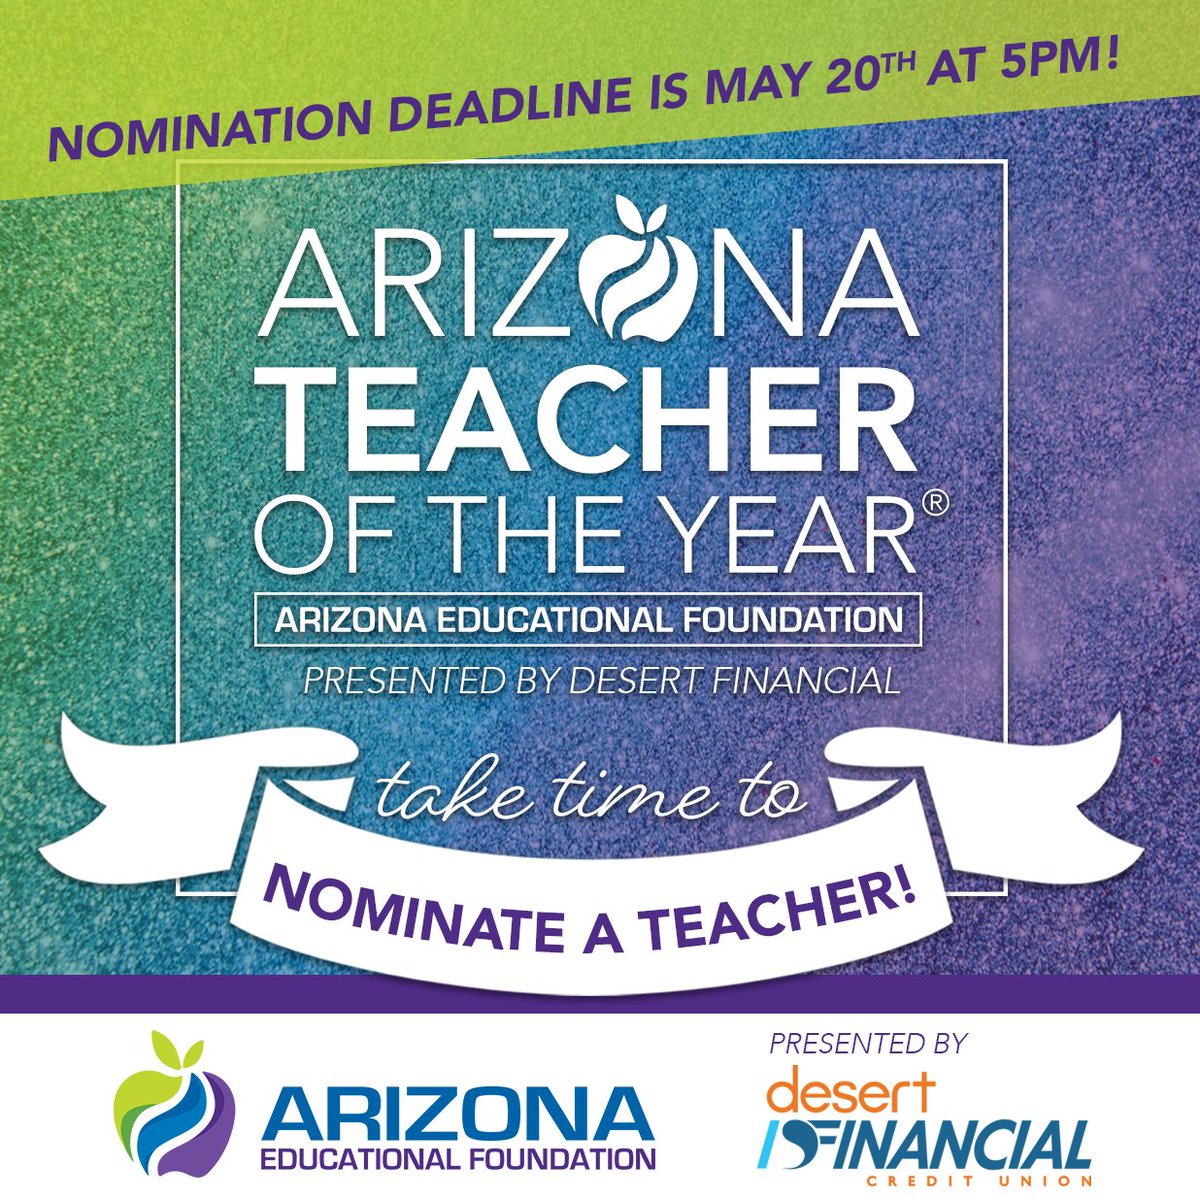 🍎 Nominations for the 2025 @azedfoundation's #Arizona Teacher of the Year® Award, presented by @DesertFinancial are closing on May 20th! Nominate a #teacher today at bit.ly/NominateTOY!
#TeacherOfTheYear #AZTOY (Share this post and help us spread the word!)